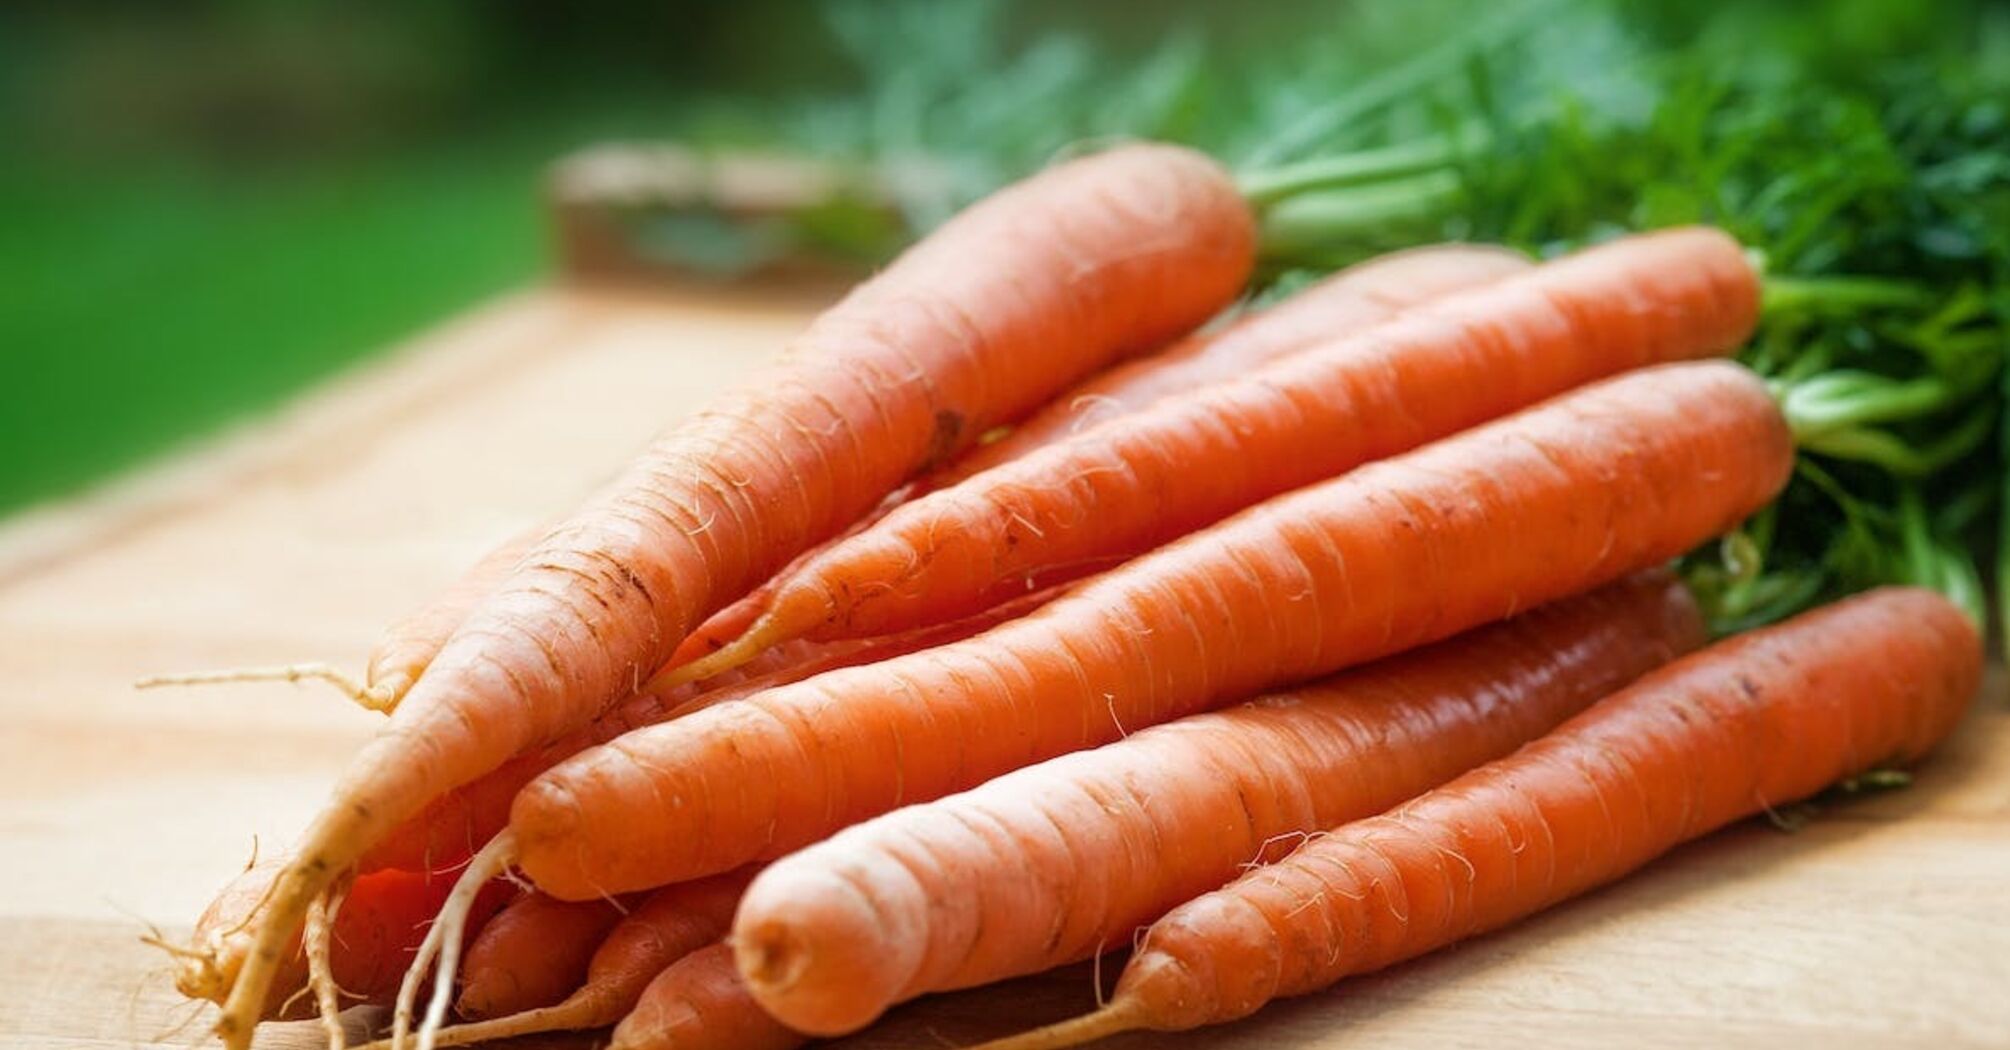 In 5 minutes, carrots will be crisp and firm again: an ingenious life hack with ice